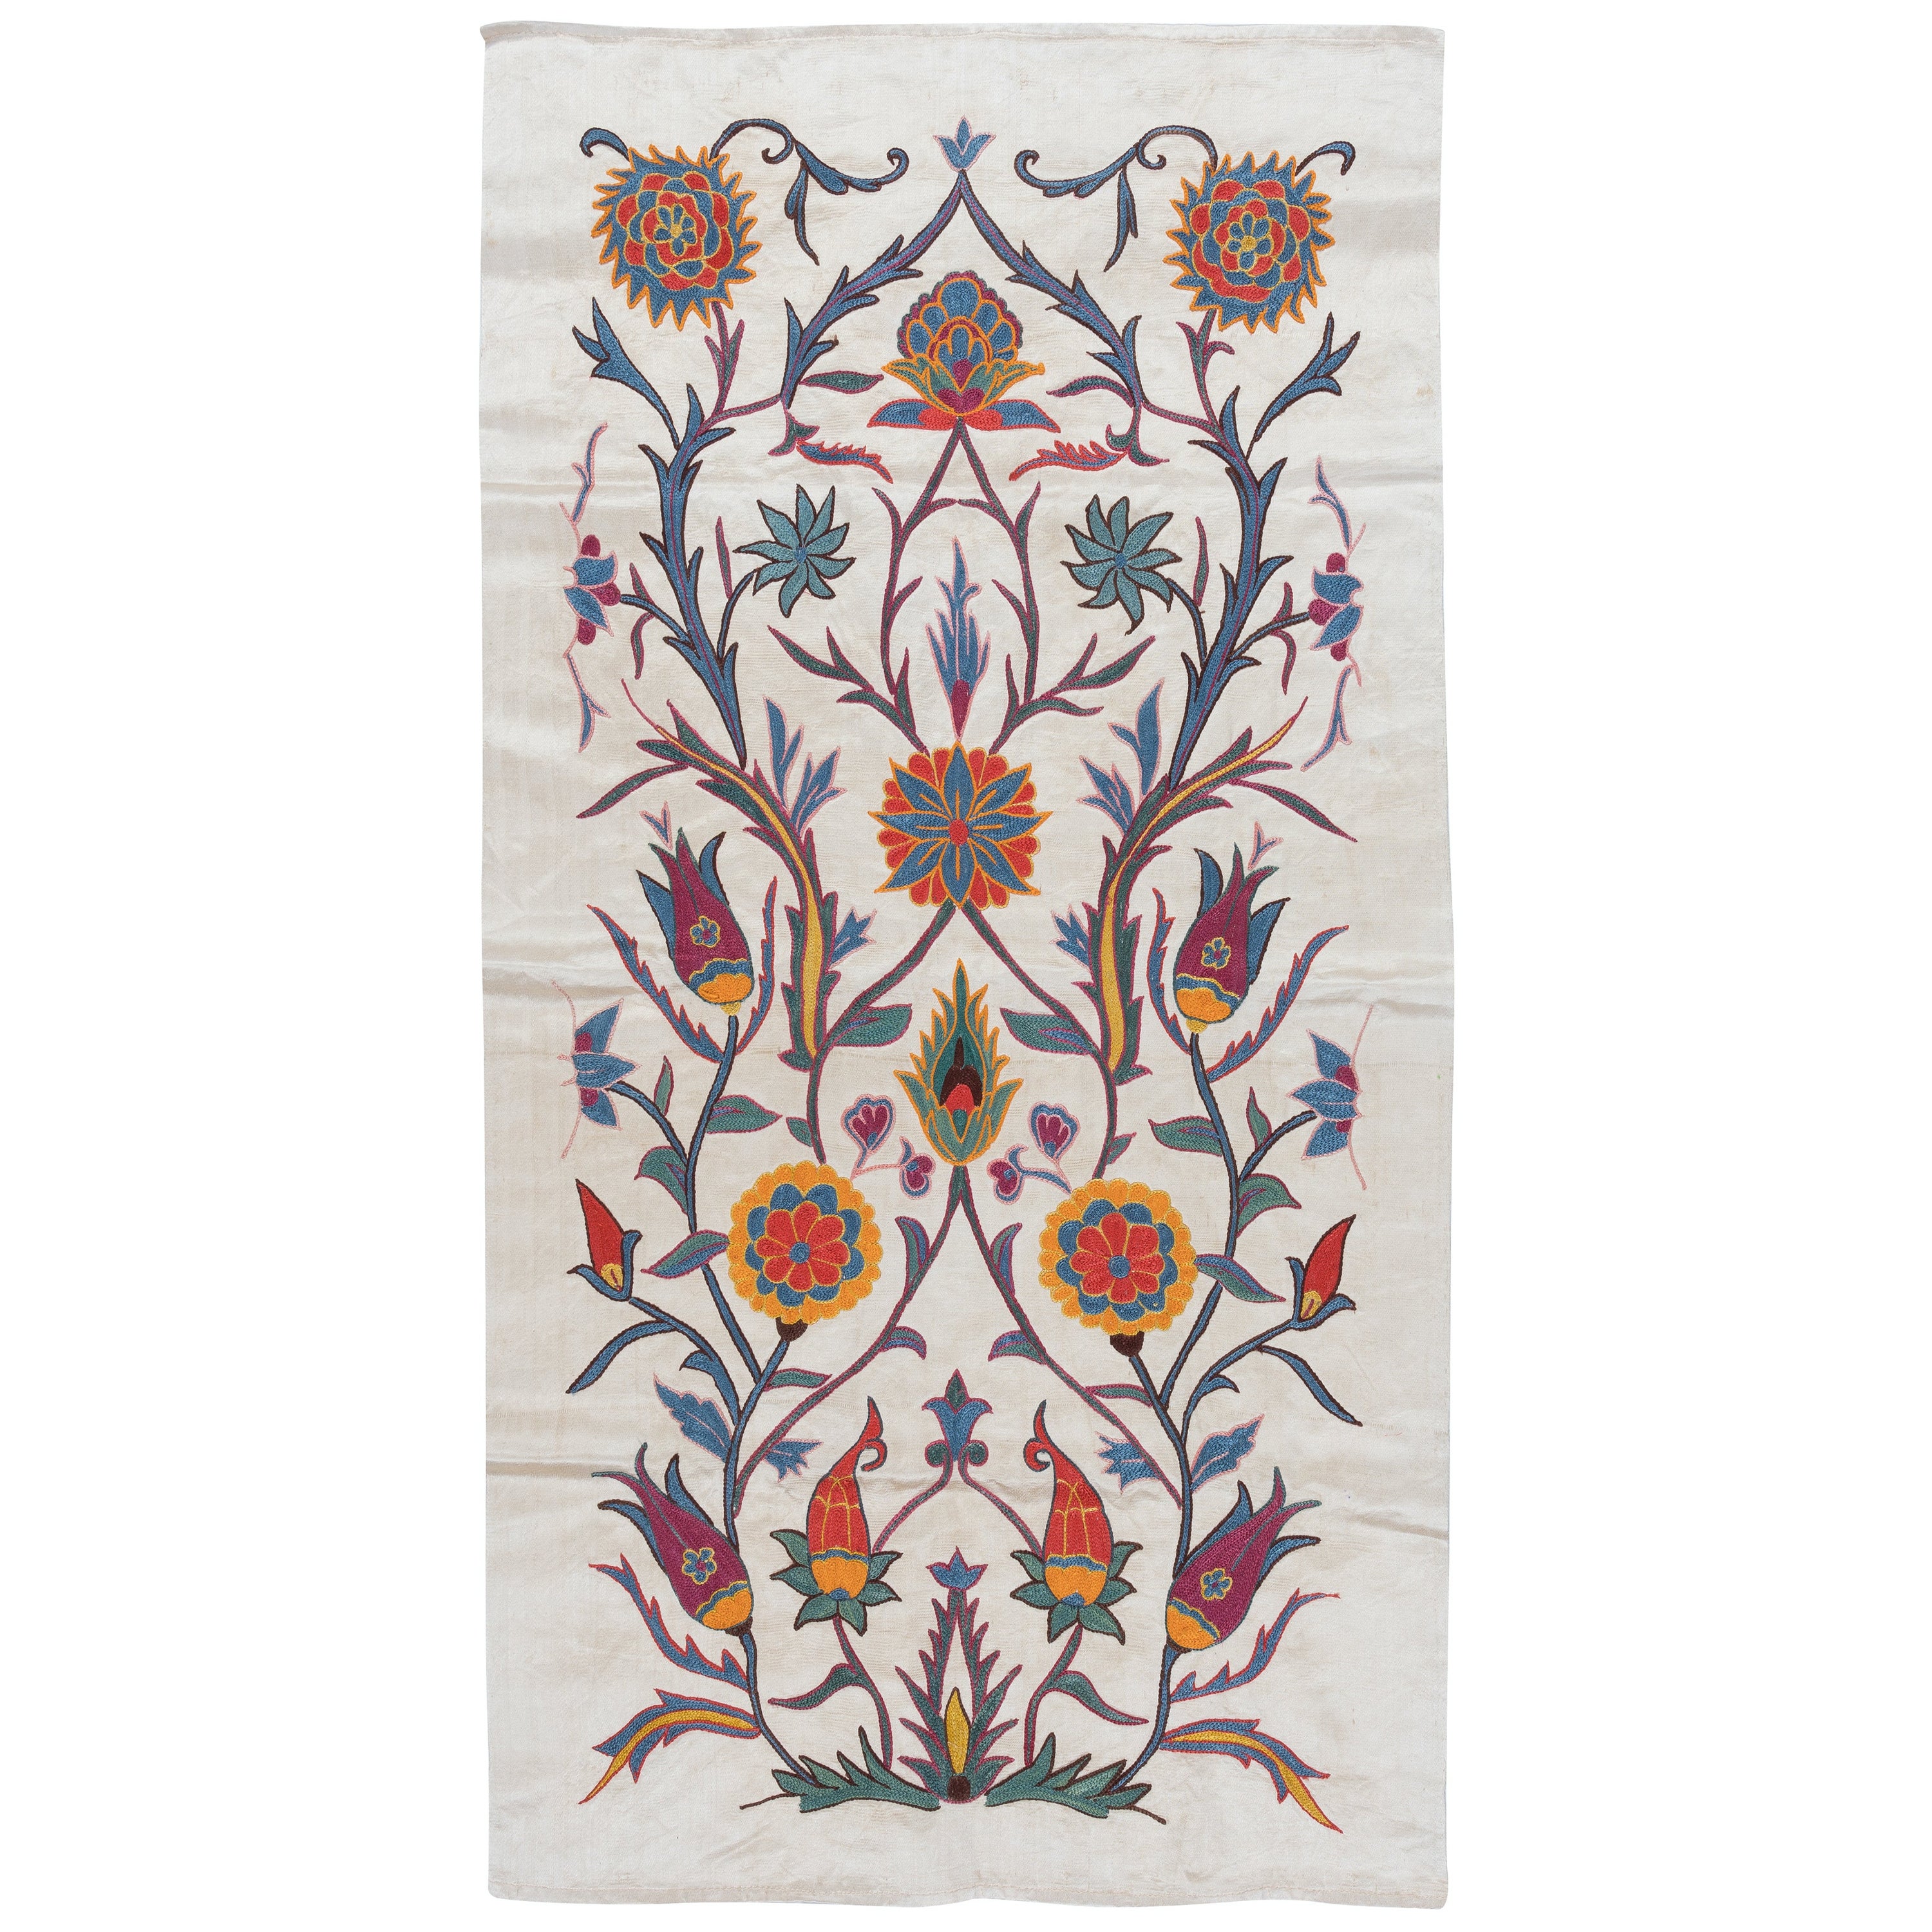 21"x41" 100% Silk Wall Hanging with Floral Design, Embroidered Uzbek Tapestry